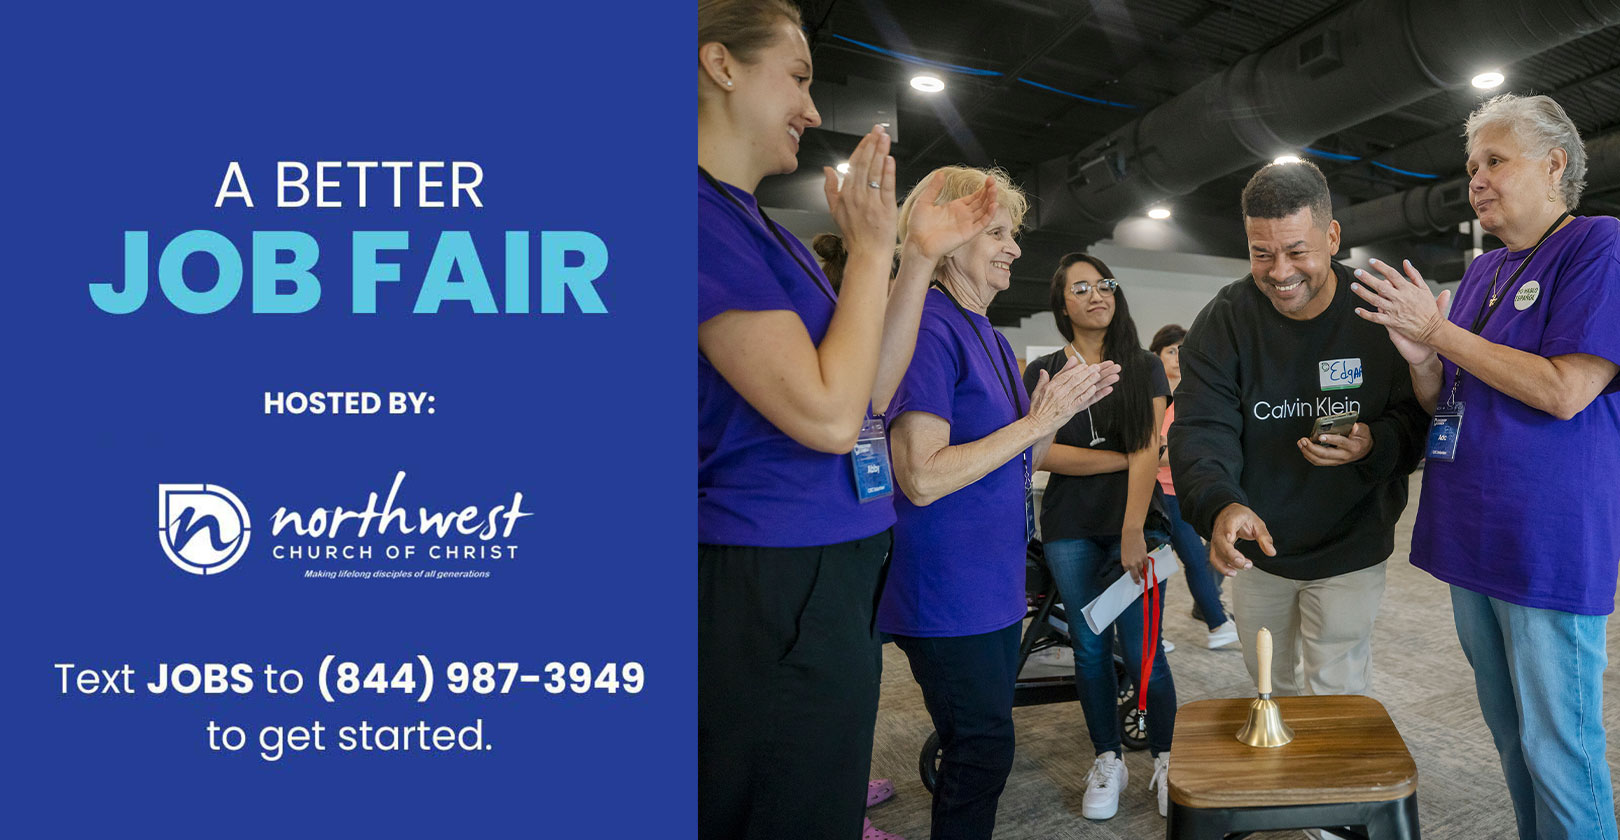 a better job fair hosted by northwest church of christ